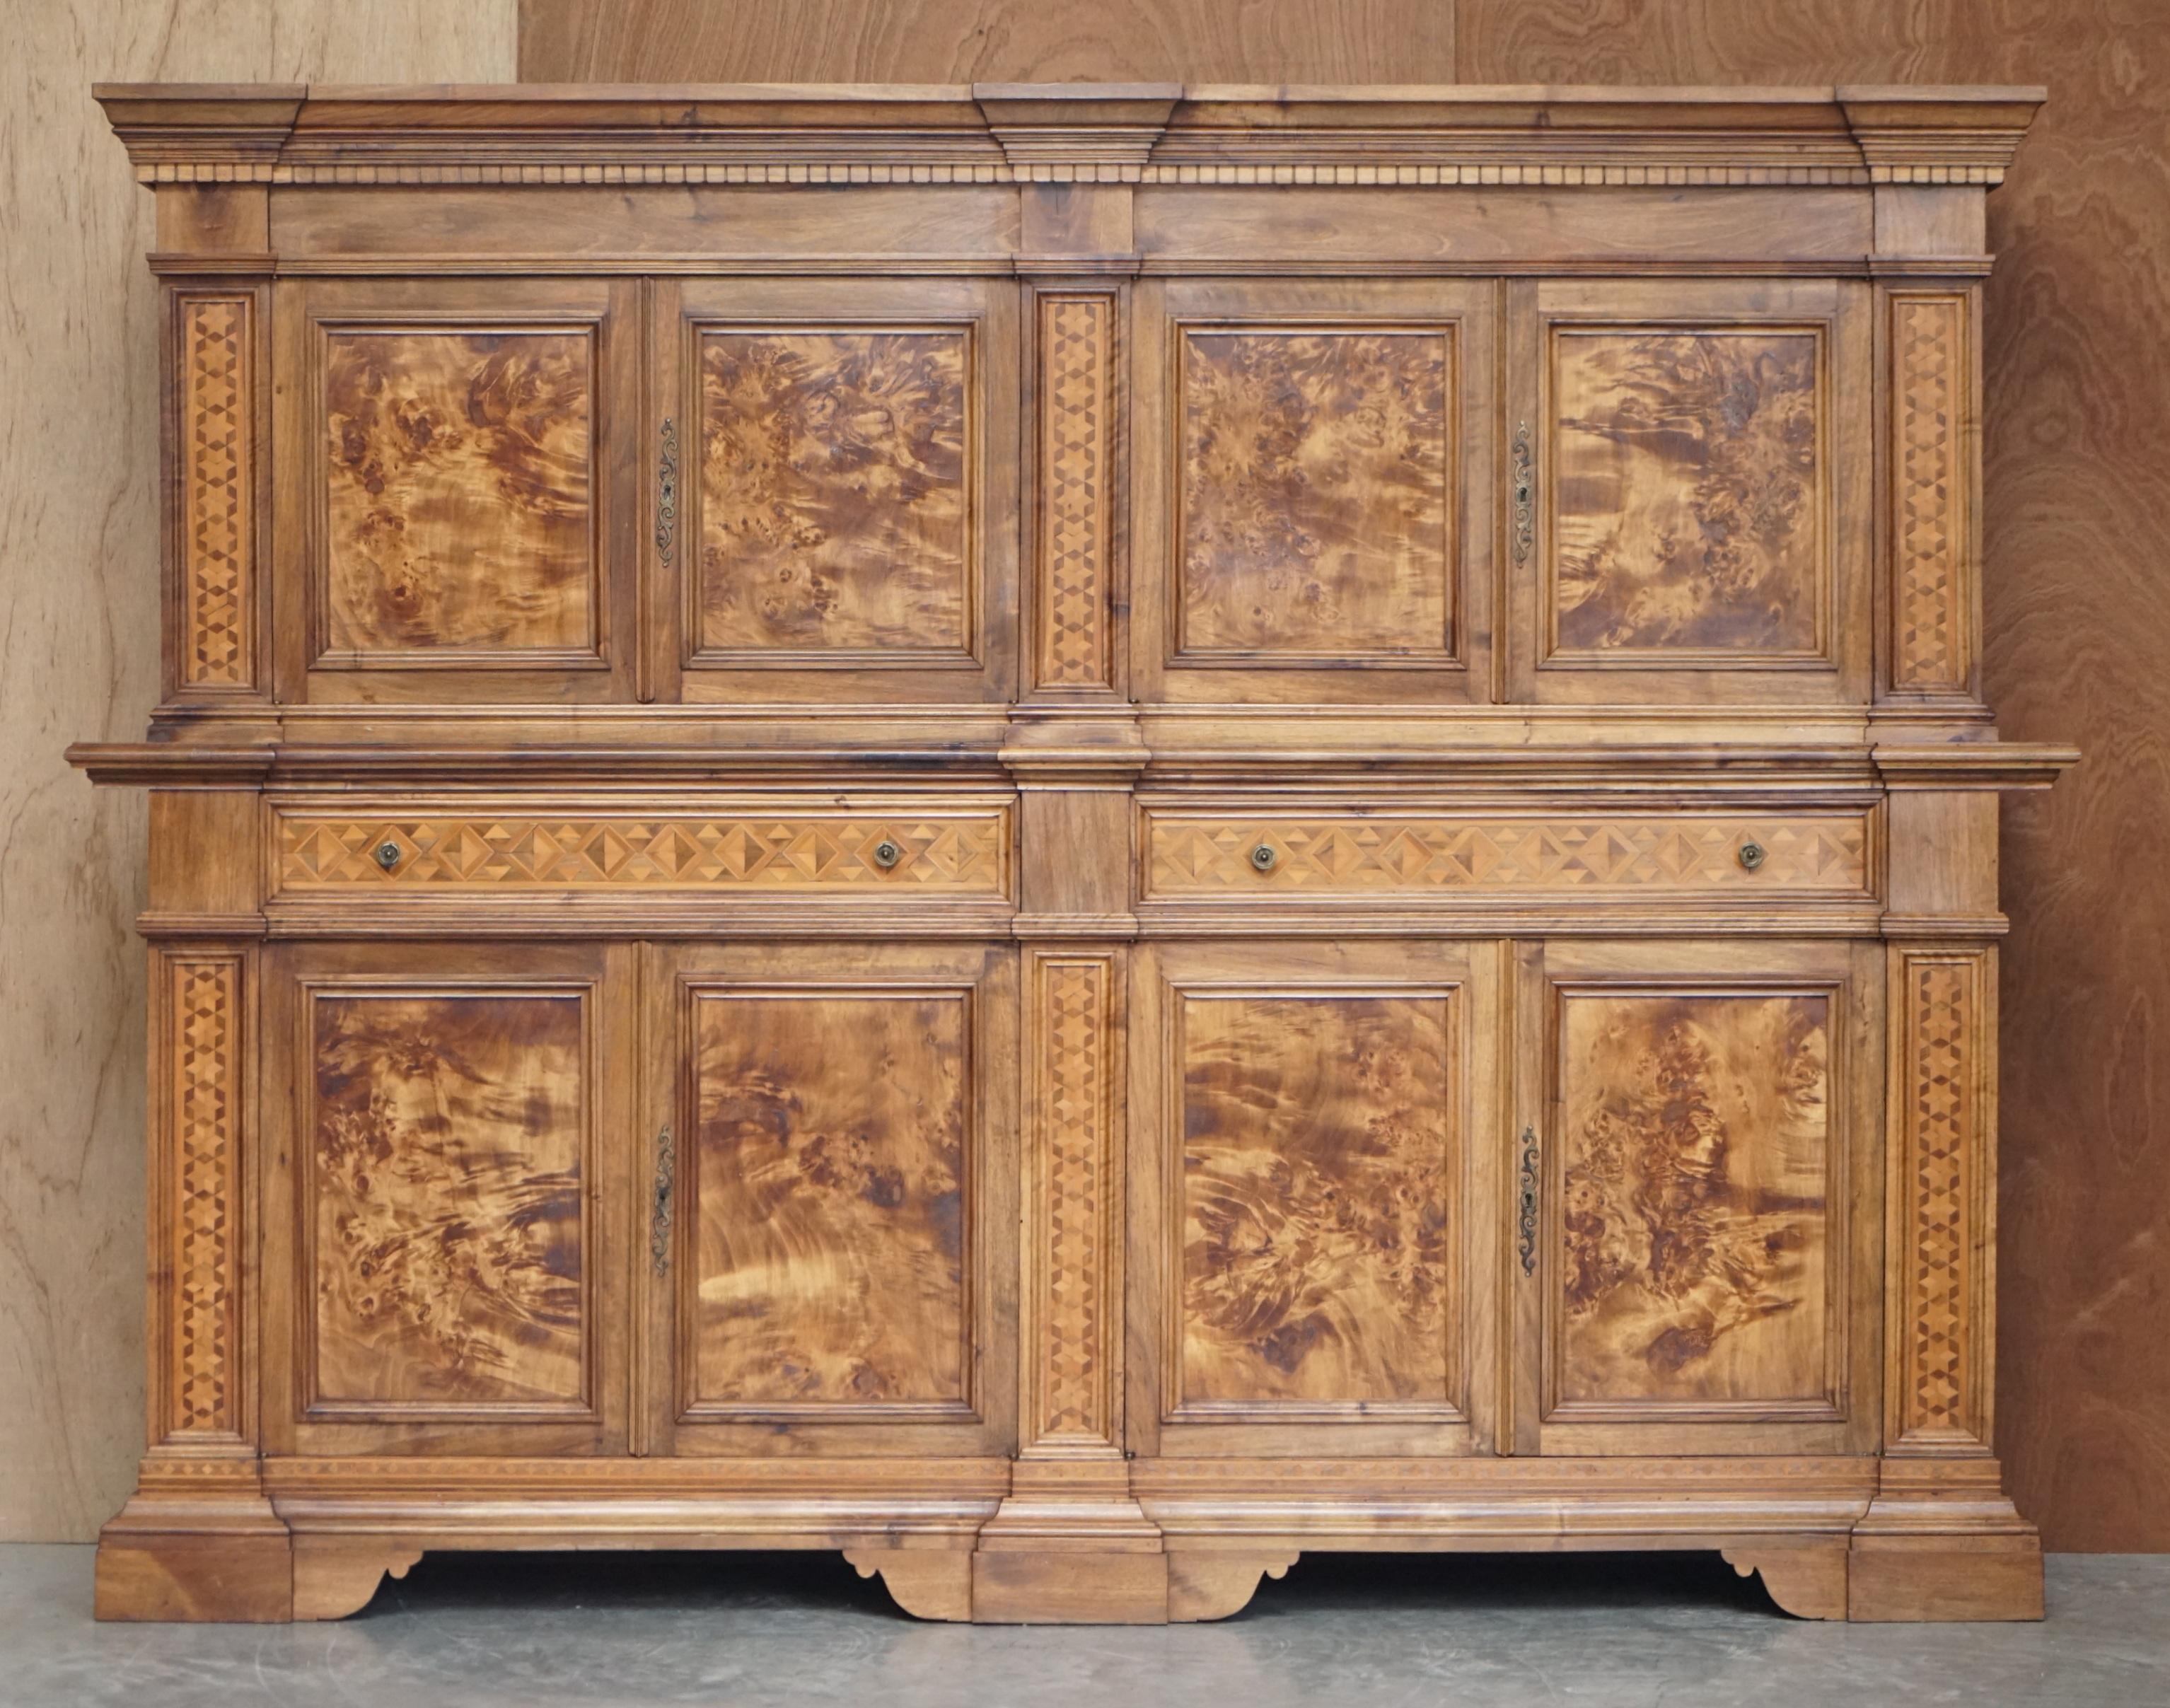 We are delighted to offer for sale this lovely vintage Italian Burr & Pippy oak Housekeepers cupboard for folded linens or pots with geometric marquetry inlay

This is truly a stunning piece, the burr & pippy oak panels are 100% solid slabs of